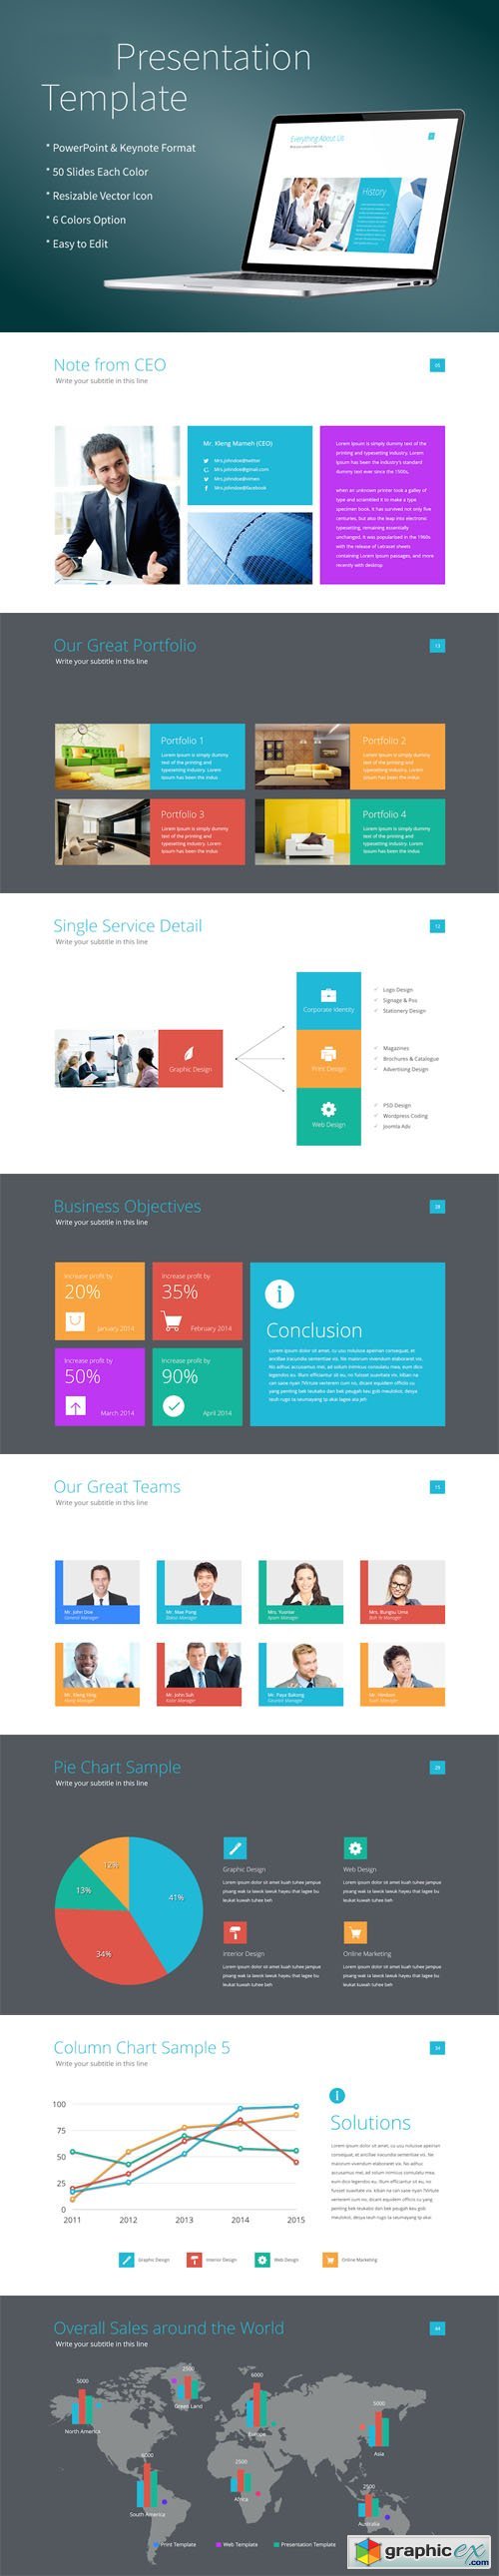 Modern & Clean Style Presentation Templates for Powerpoint & Keynote